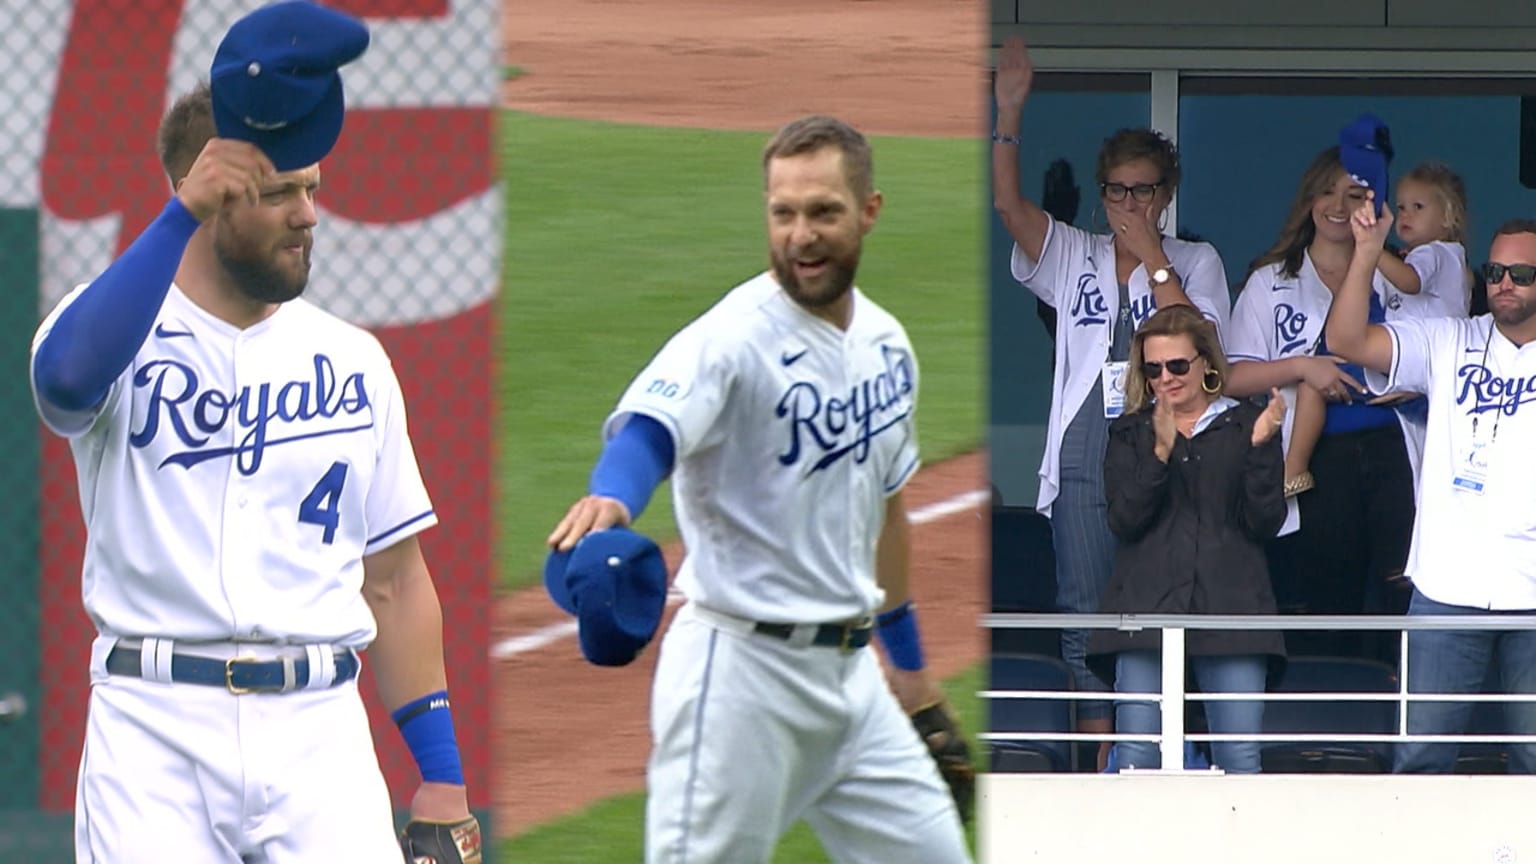 FOREVER ROYAL: Royals say goodbye to Alex Gordon with emotional video, hugs  as he exits field